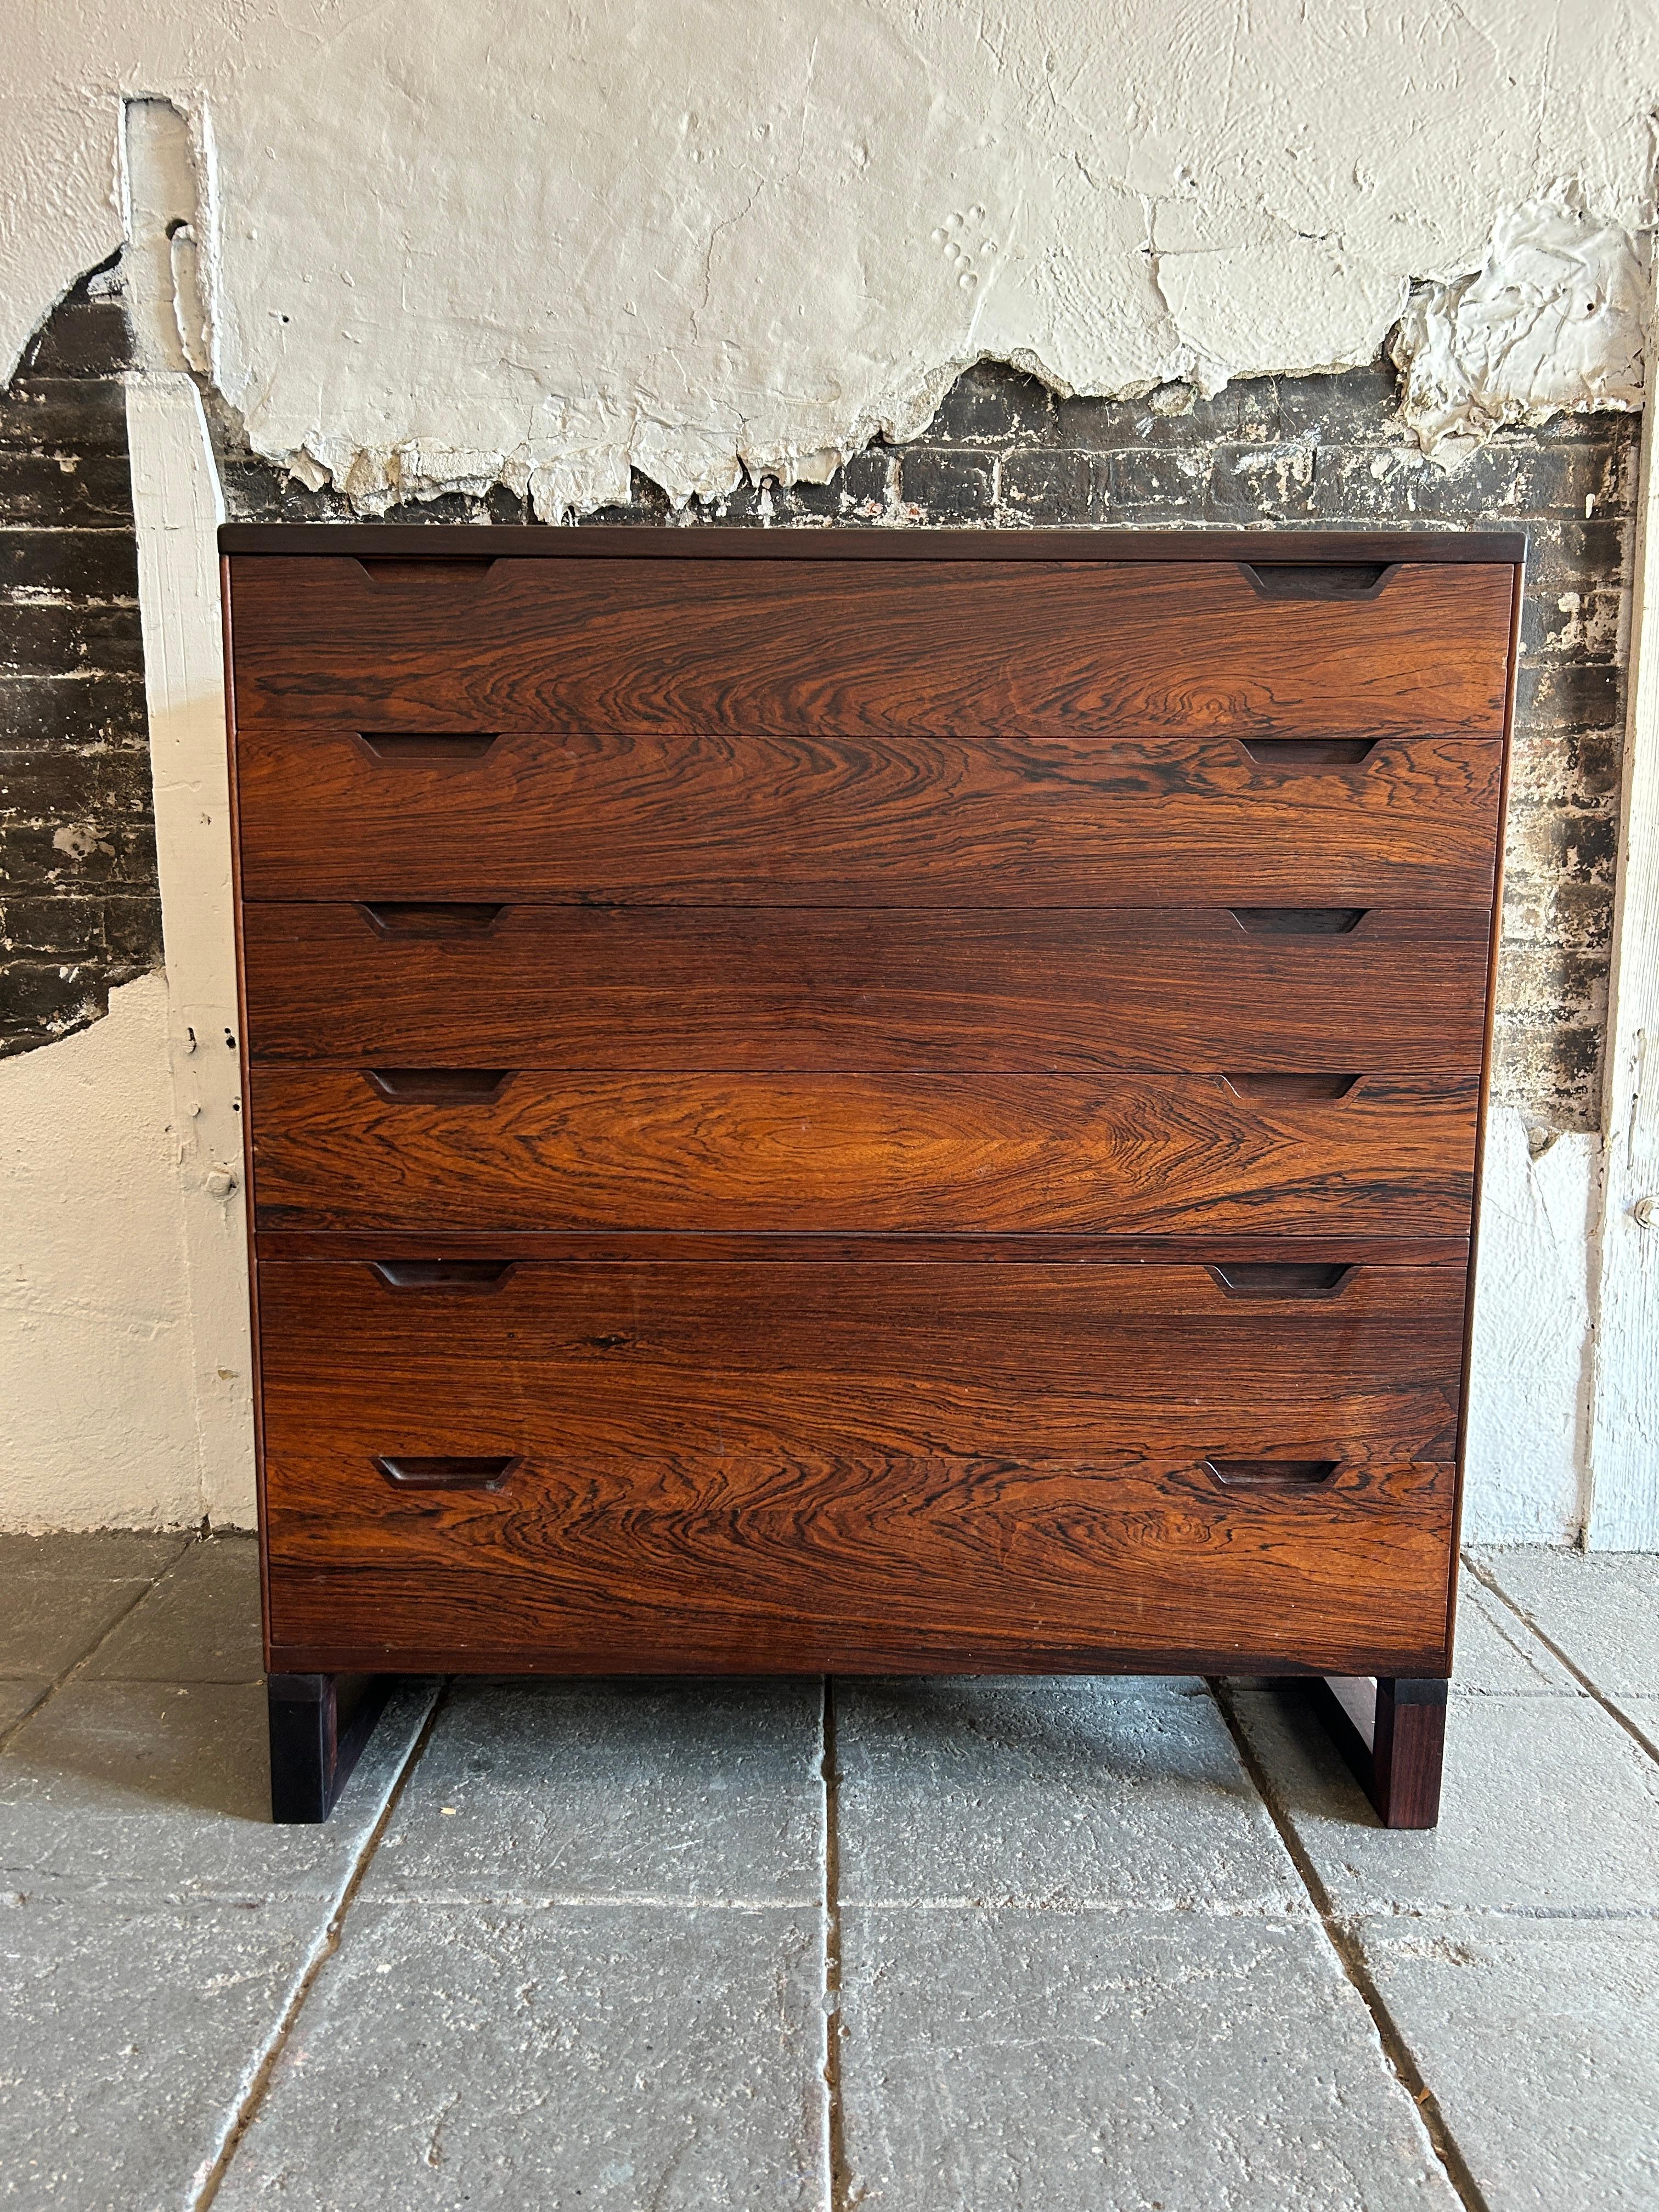 Stunning danish modern Svend Langkilde Rosewood 6 drawer tall dresser. Really beautiful Scandinavian woodworking on this 6 drawer dresser. The rosewood grain is really beautiful great design all around. Sits on solid rosewood base. Made in Denmark.